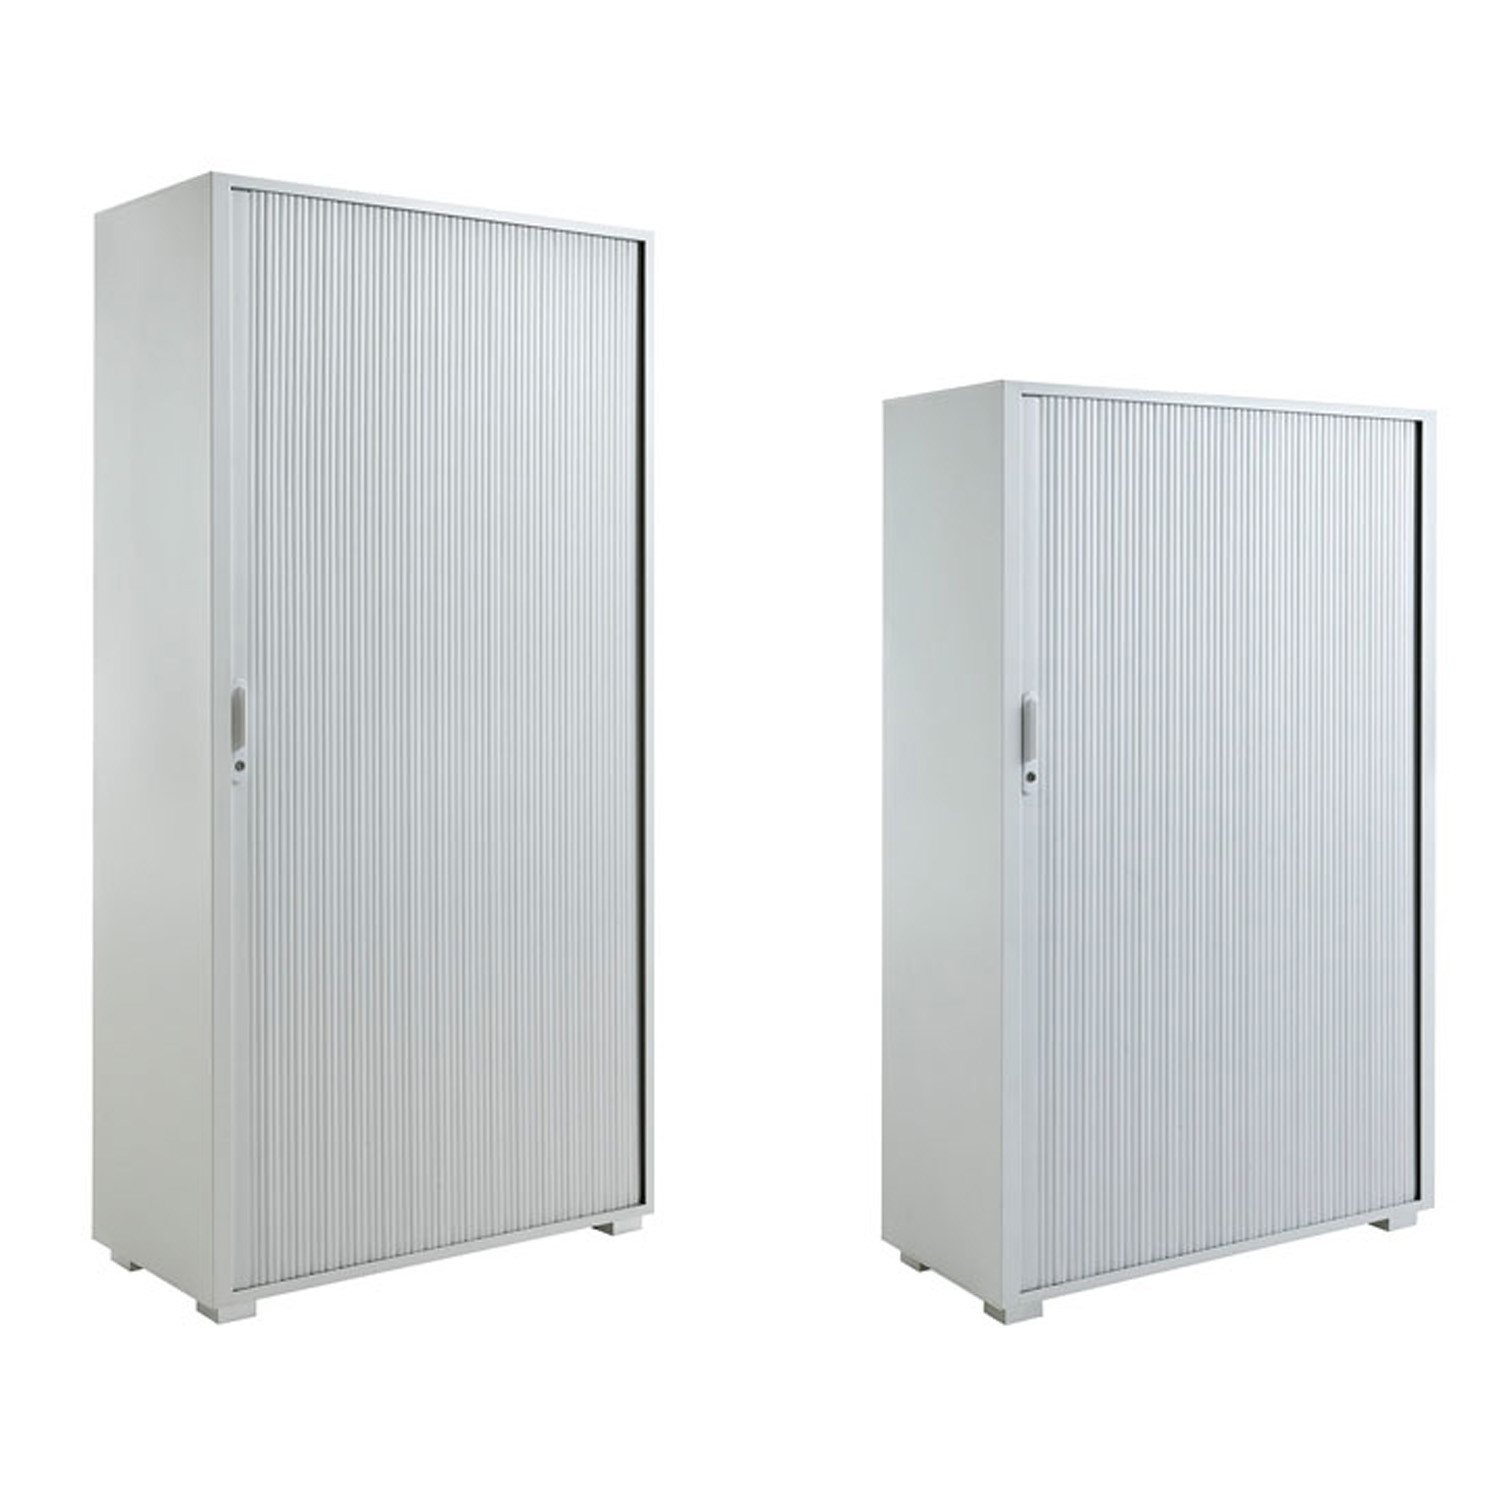 Primo Tambour Cabinets are available in a wide range of sizes